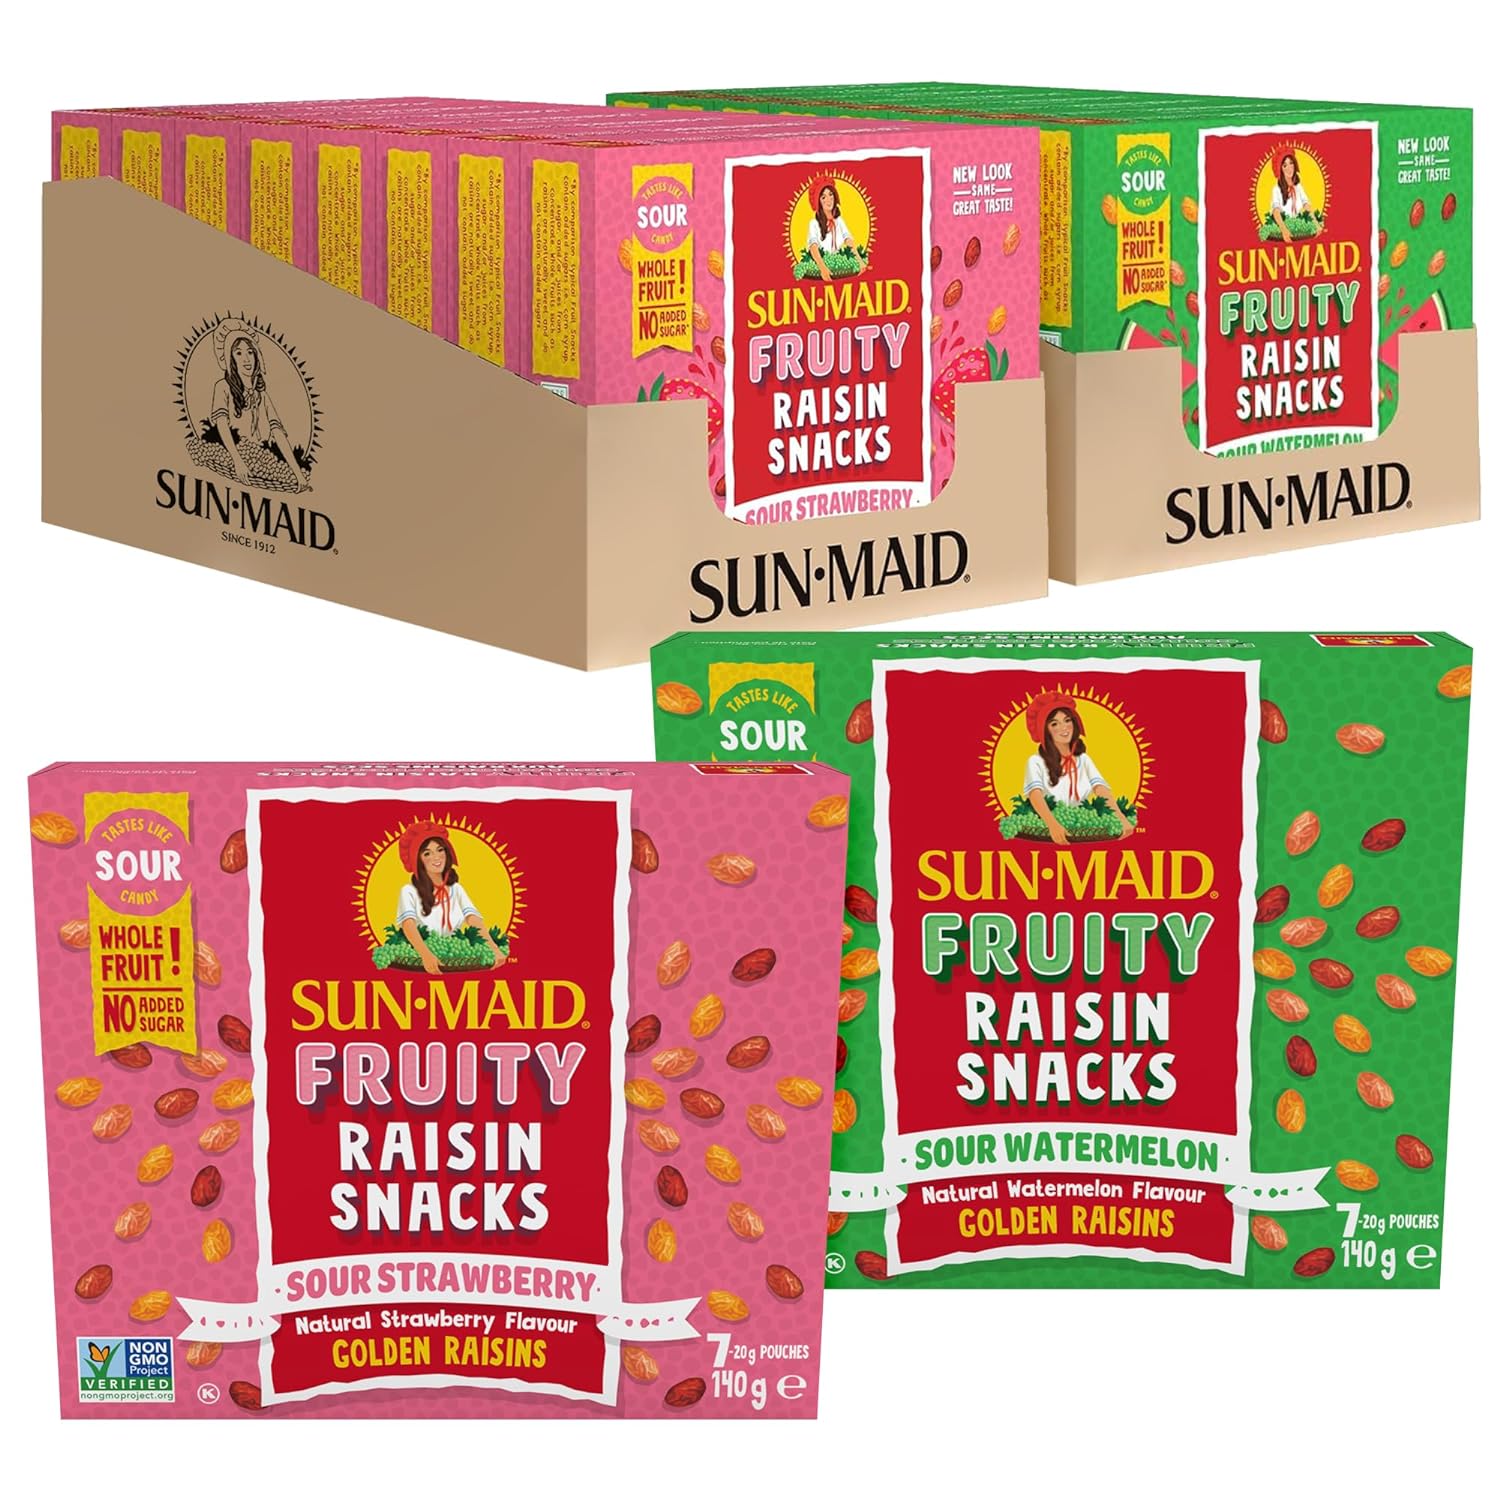 Sun-Maid Fruity Raisins Variety Pack | Strawberry (Pack Of 56) and Watermelon (Pack Of 56) | 1 Ounce Boxes |Whole Dried Fruit Snacks| No Artificial Flavors | Non-GMO